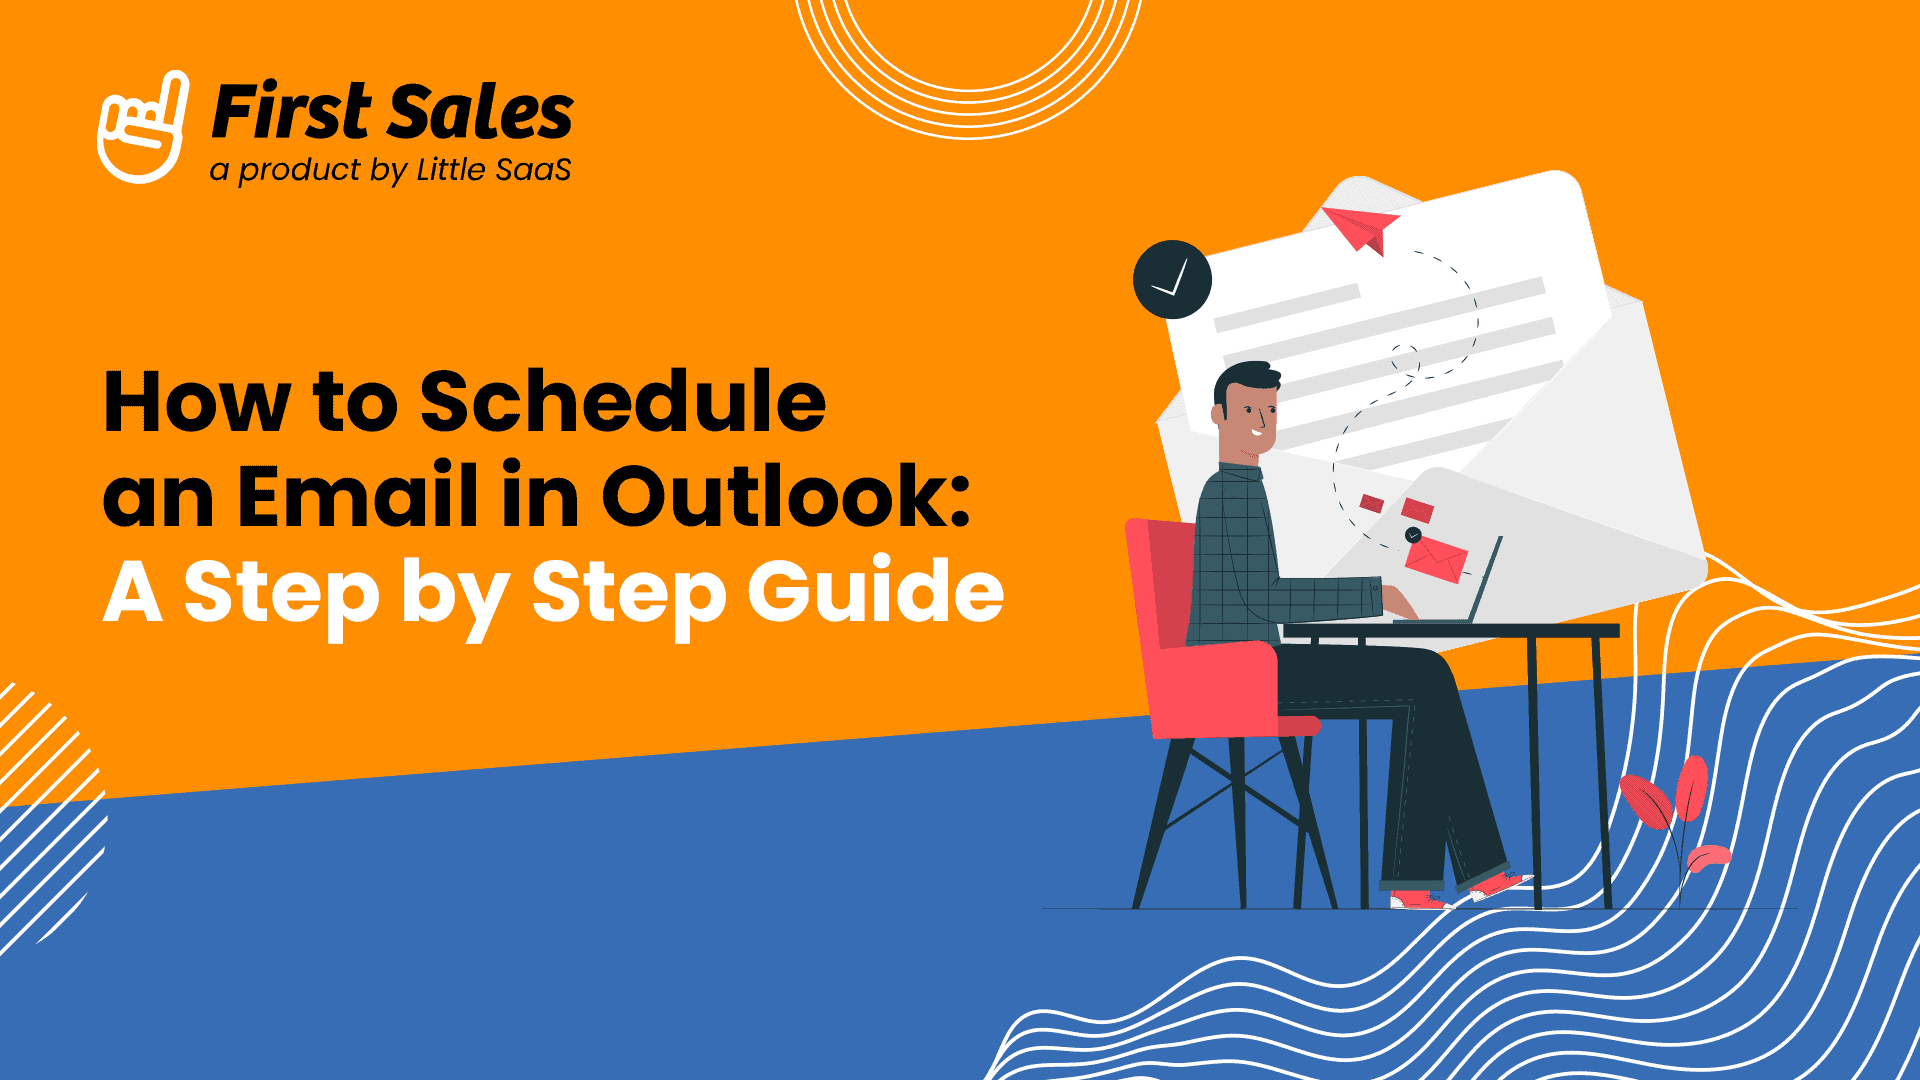 How To Schedule an Email in Outlook